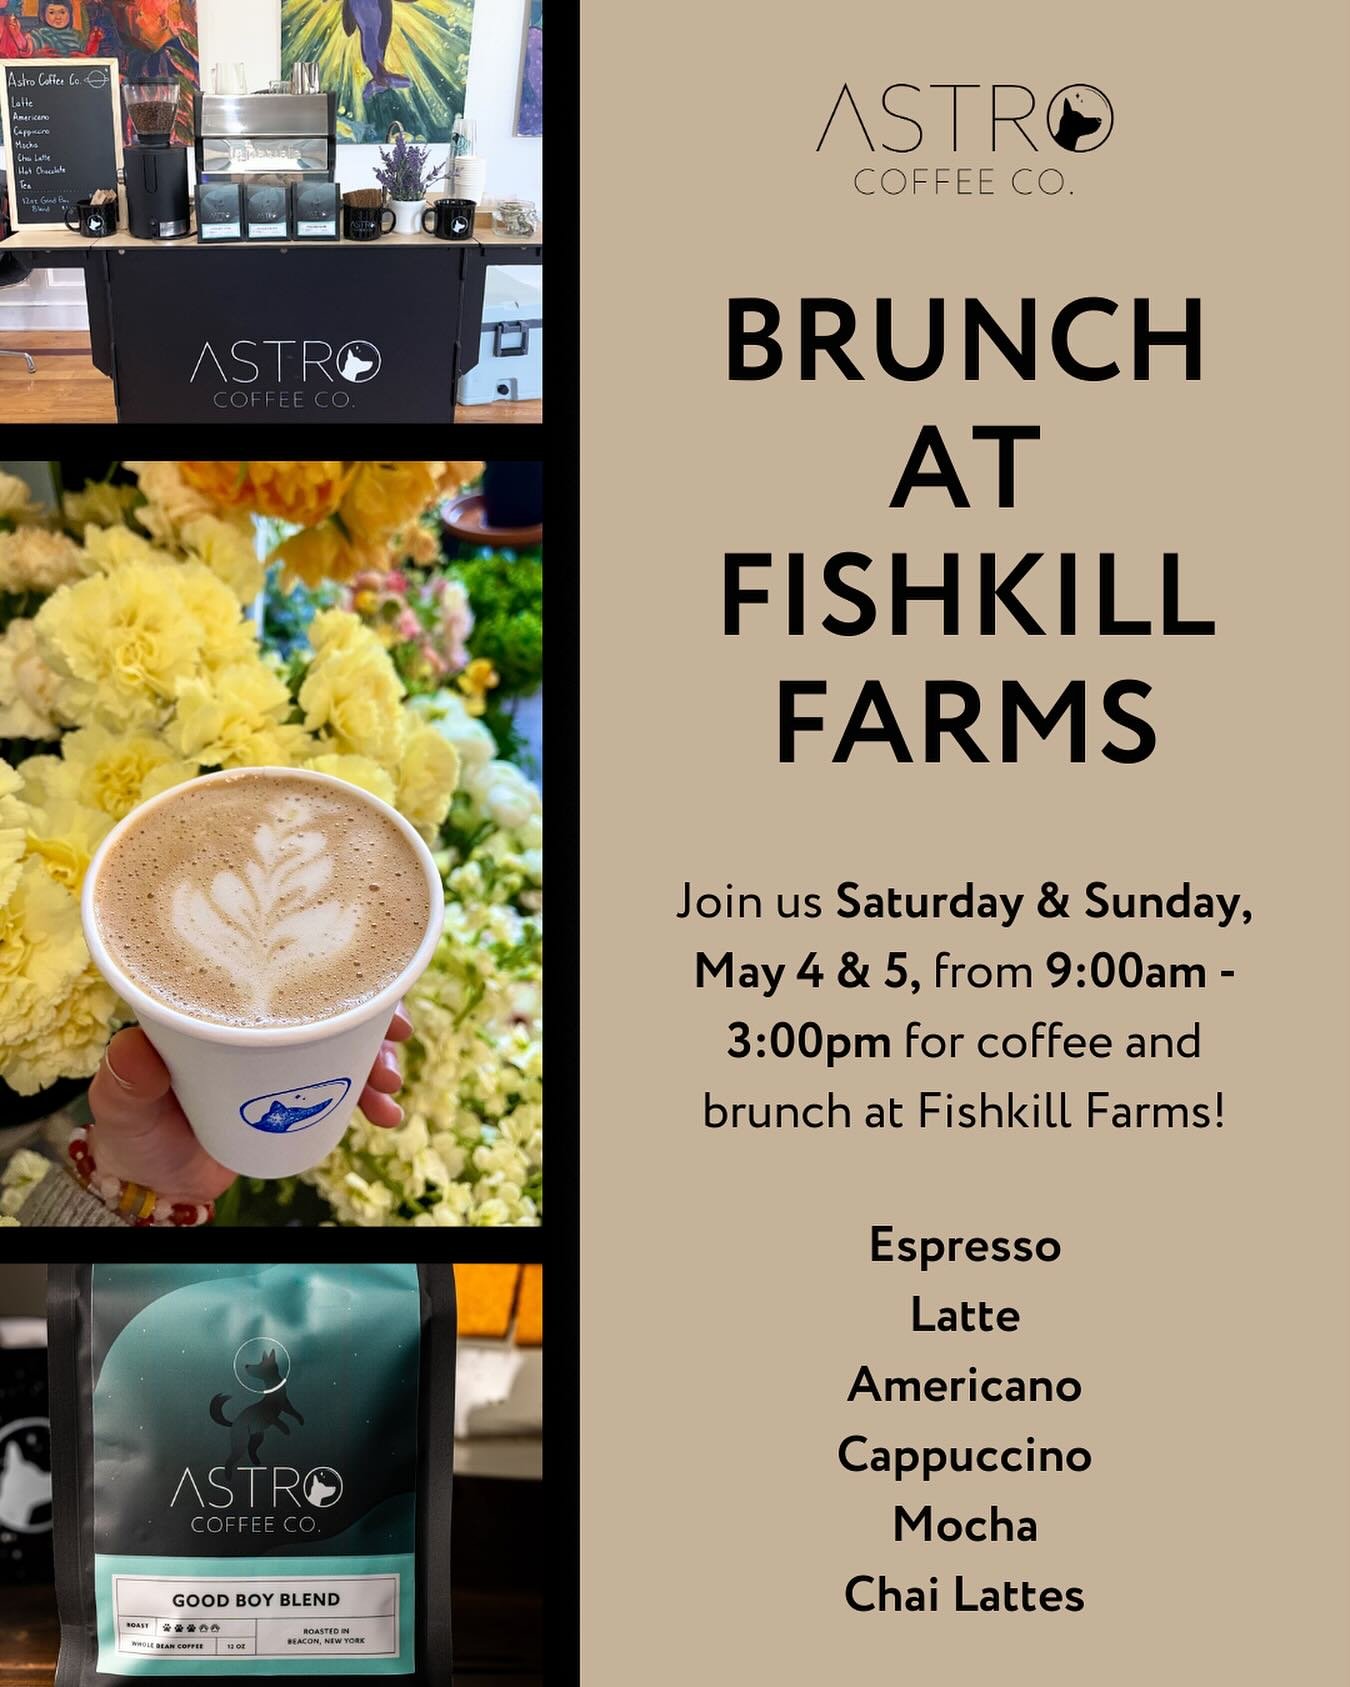 Weekend Brunch at Fishkill Farms 🍳

Join us for their last brunch of the season at @fishkillfarms! Coffee will start being served at 9am, and brunch starts at 10am! 

📅 May 4 &amp; 5
🕙 9:00am - 3:00pm

📍Fishkill Farms
9 Fishkill Farm Rd
Hopewell 